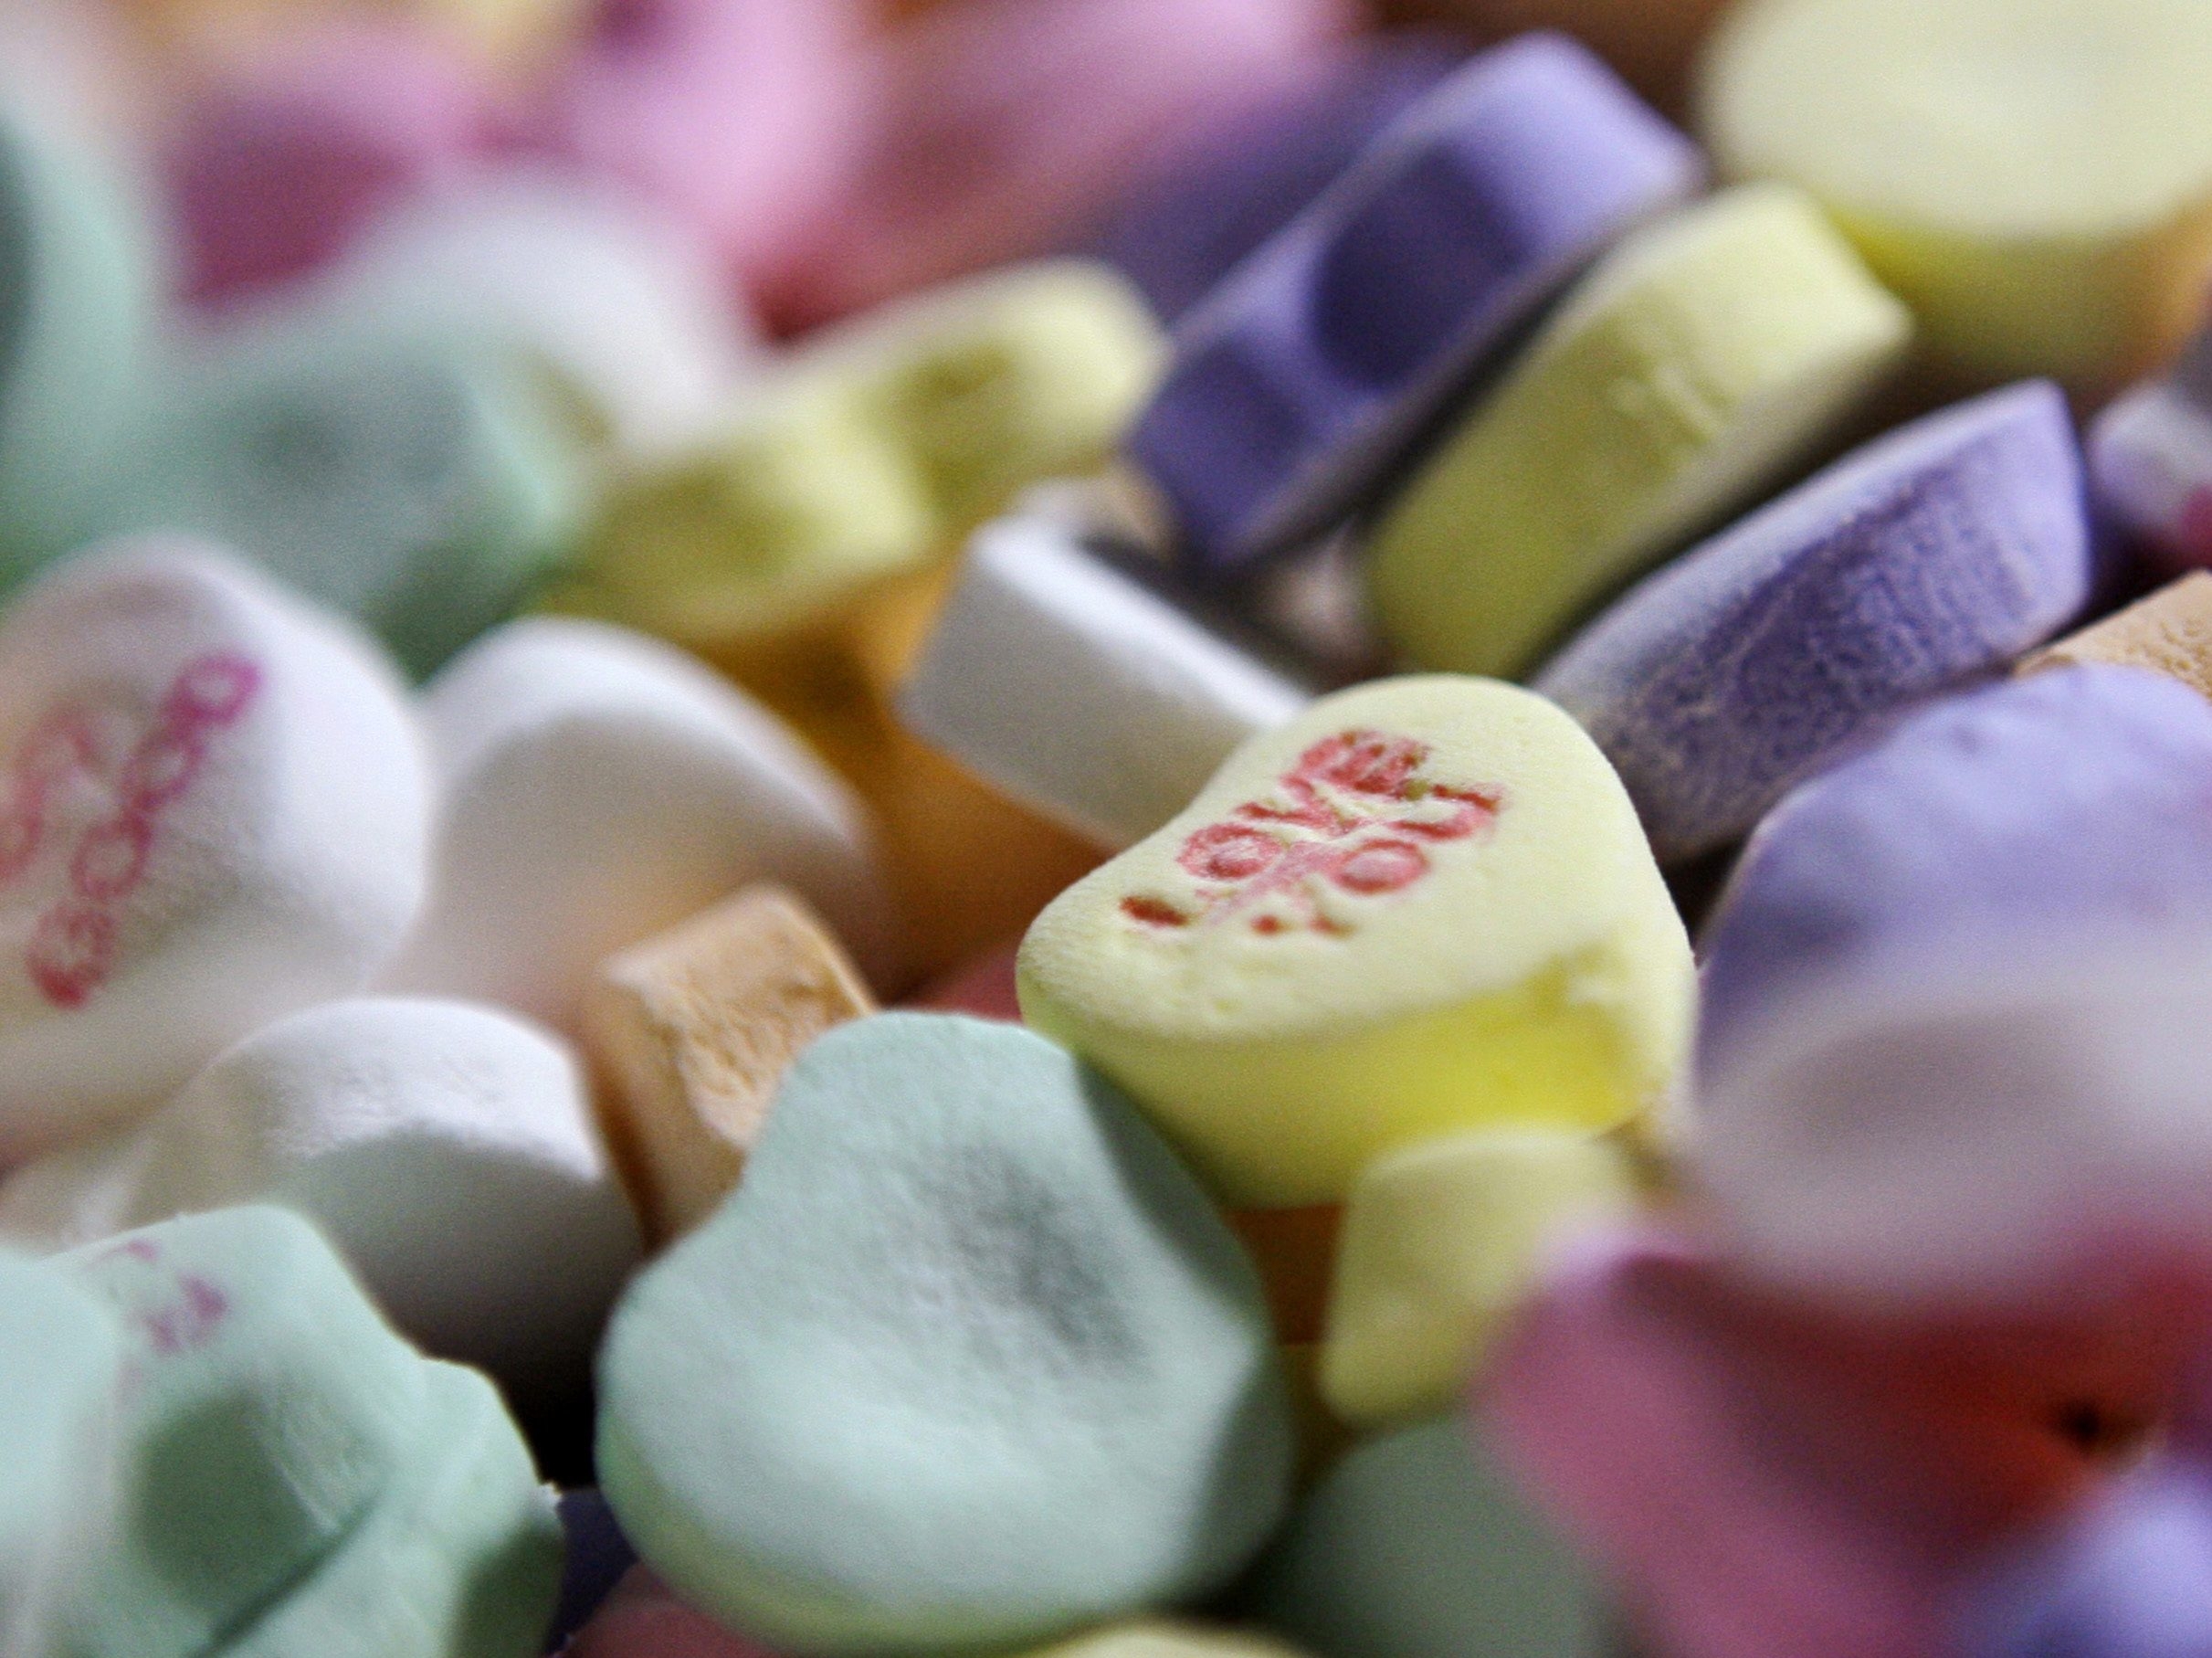 Sweethearts Candies Wont Be On Store Shelves This Valentines Day Canoecom 